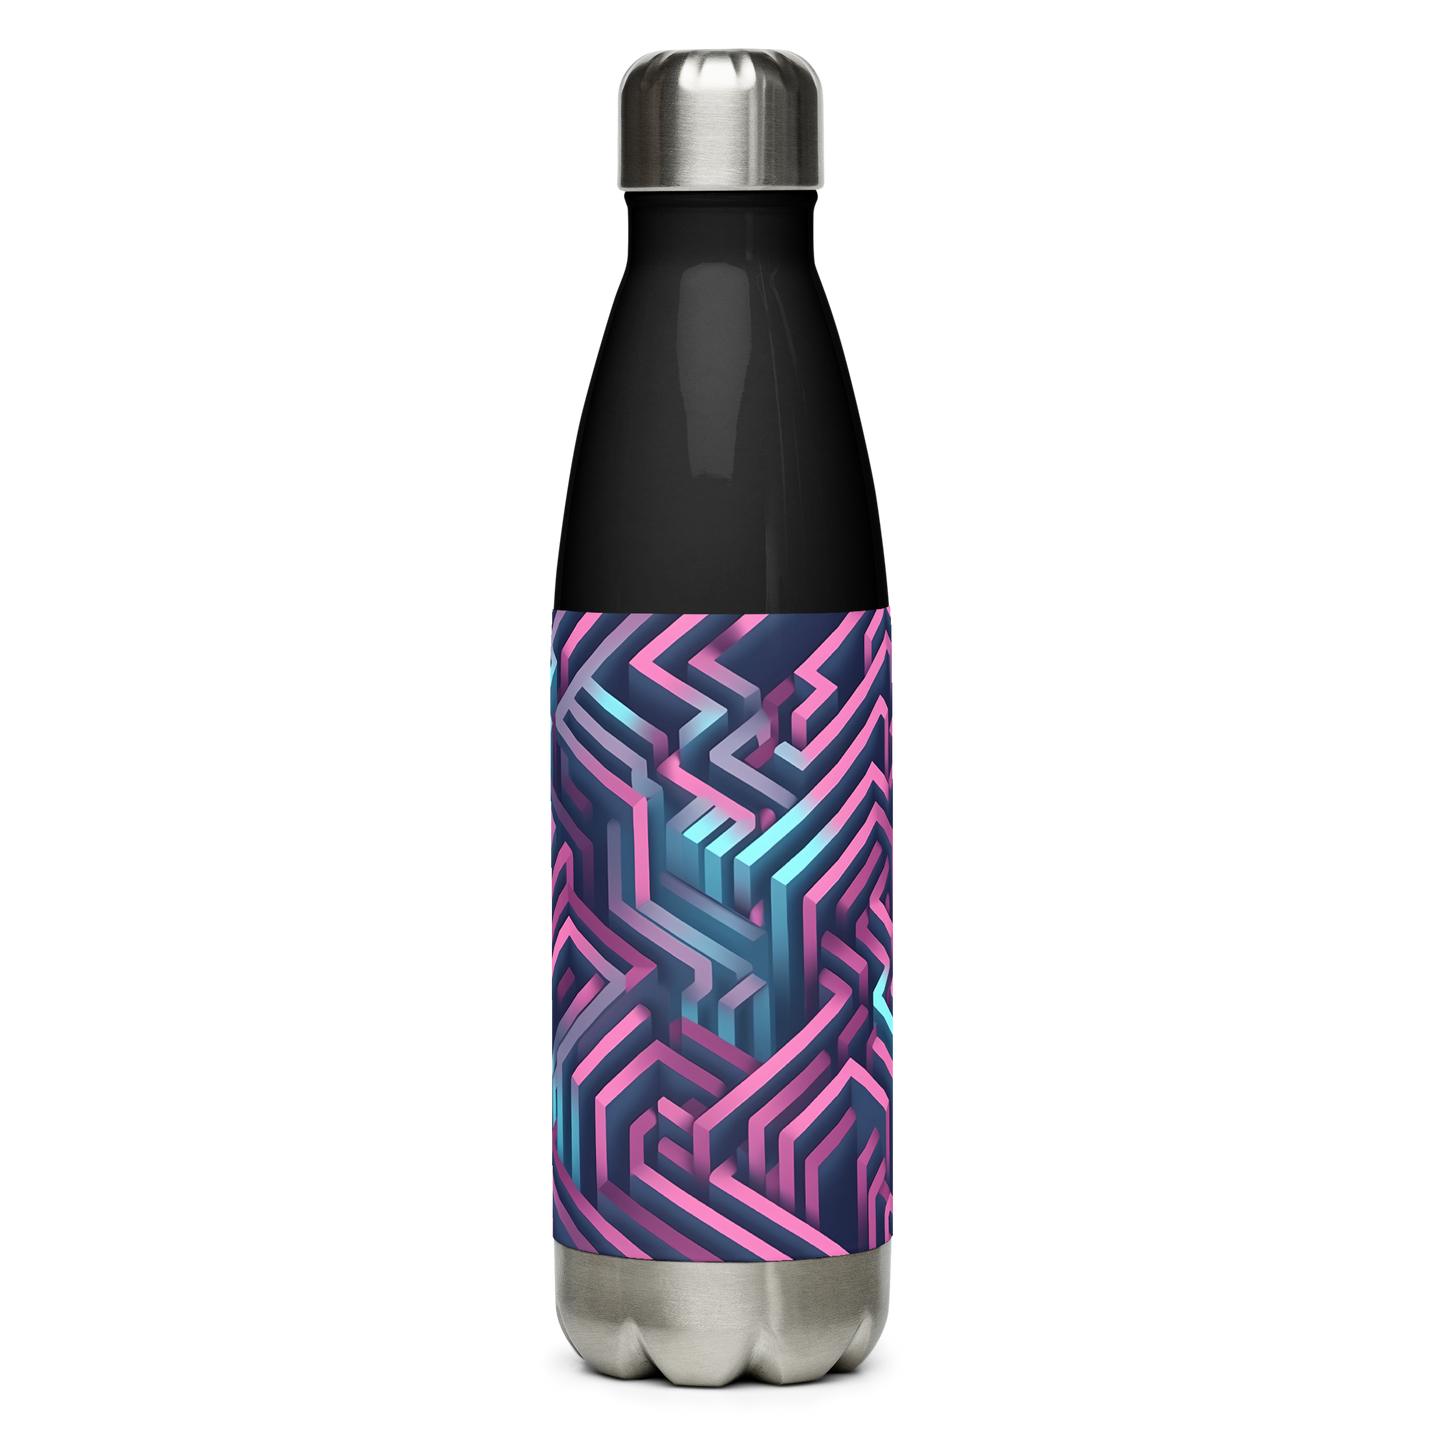 3D Maze Illusion | 3D Patterns | Stainless Steel Water Bottle - #4